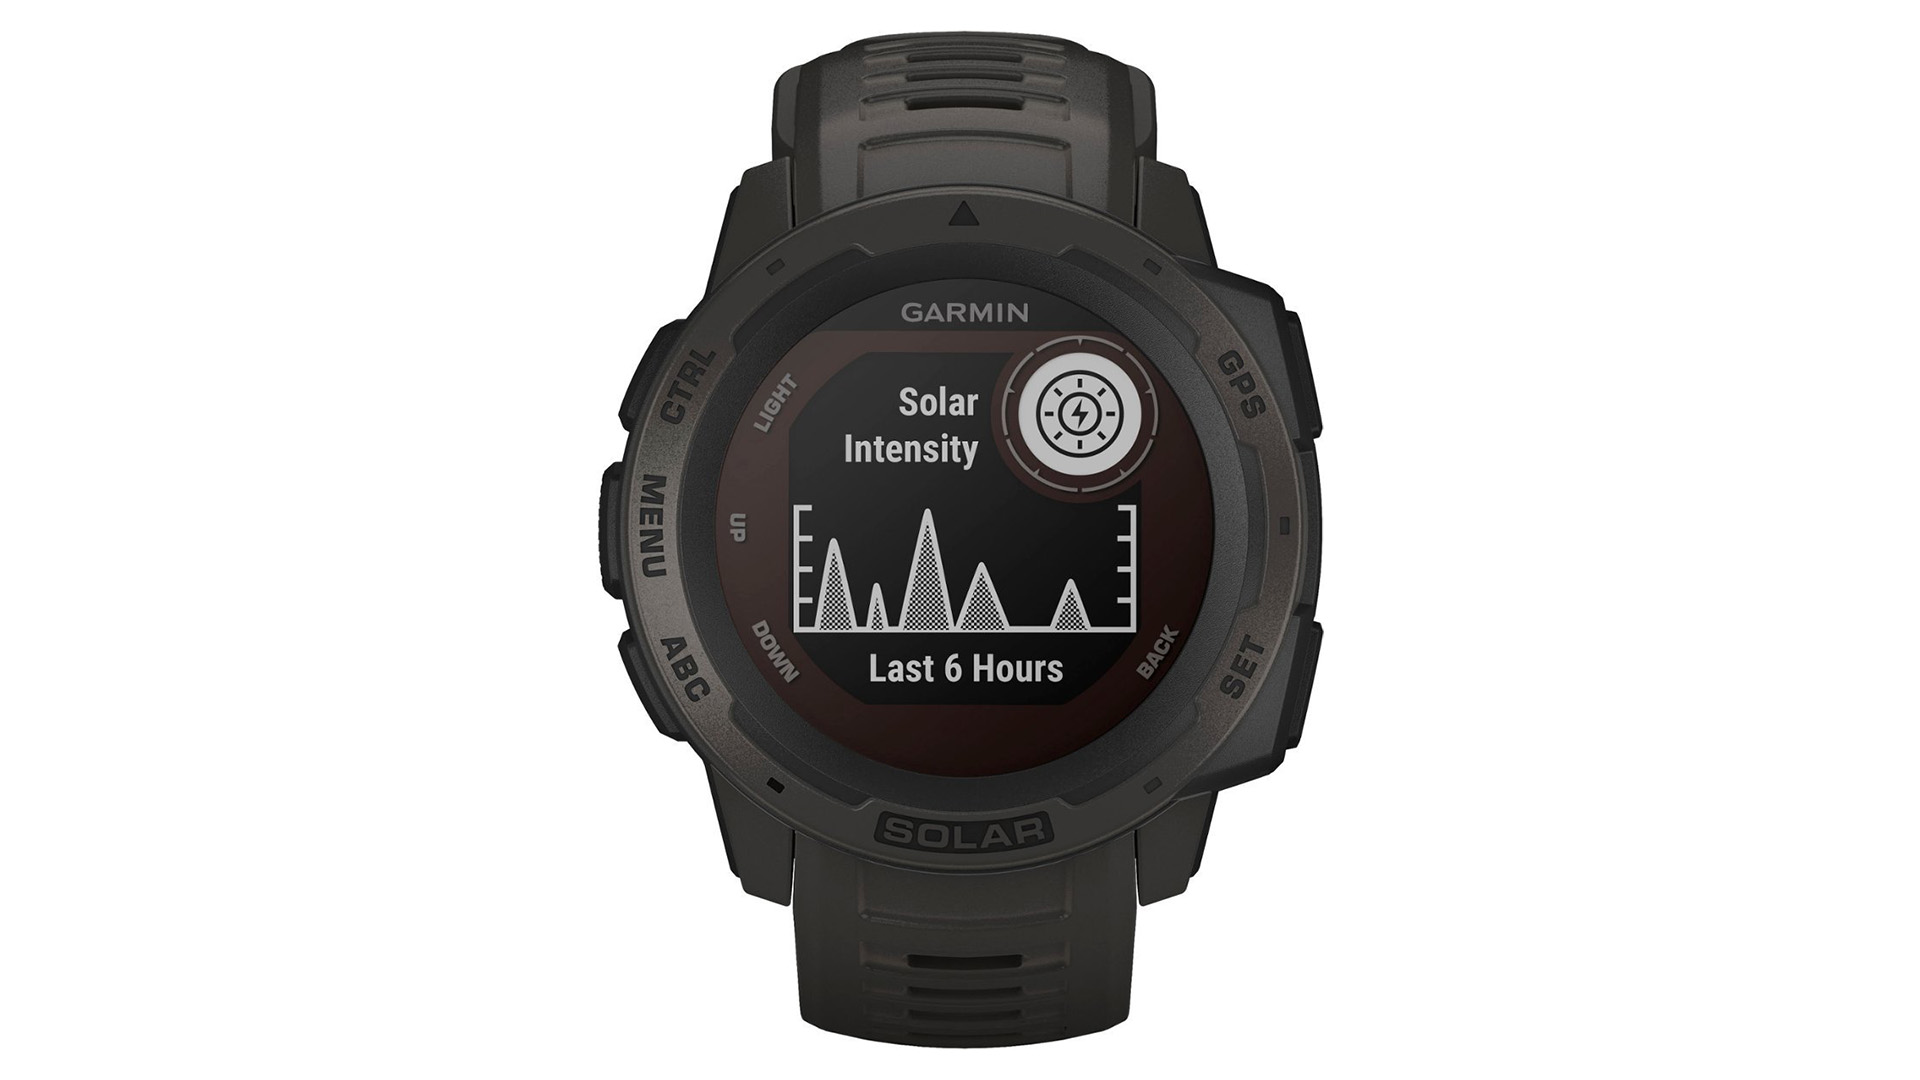 Save over $120 on one of our favorite Garmin running watches